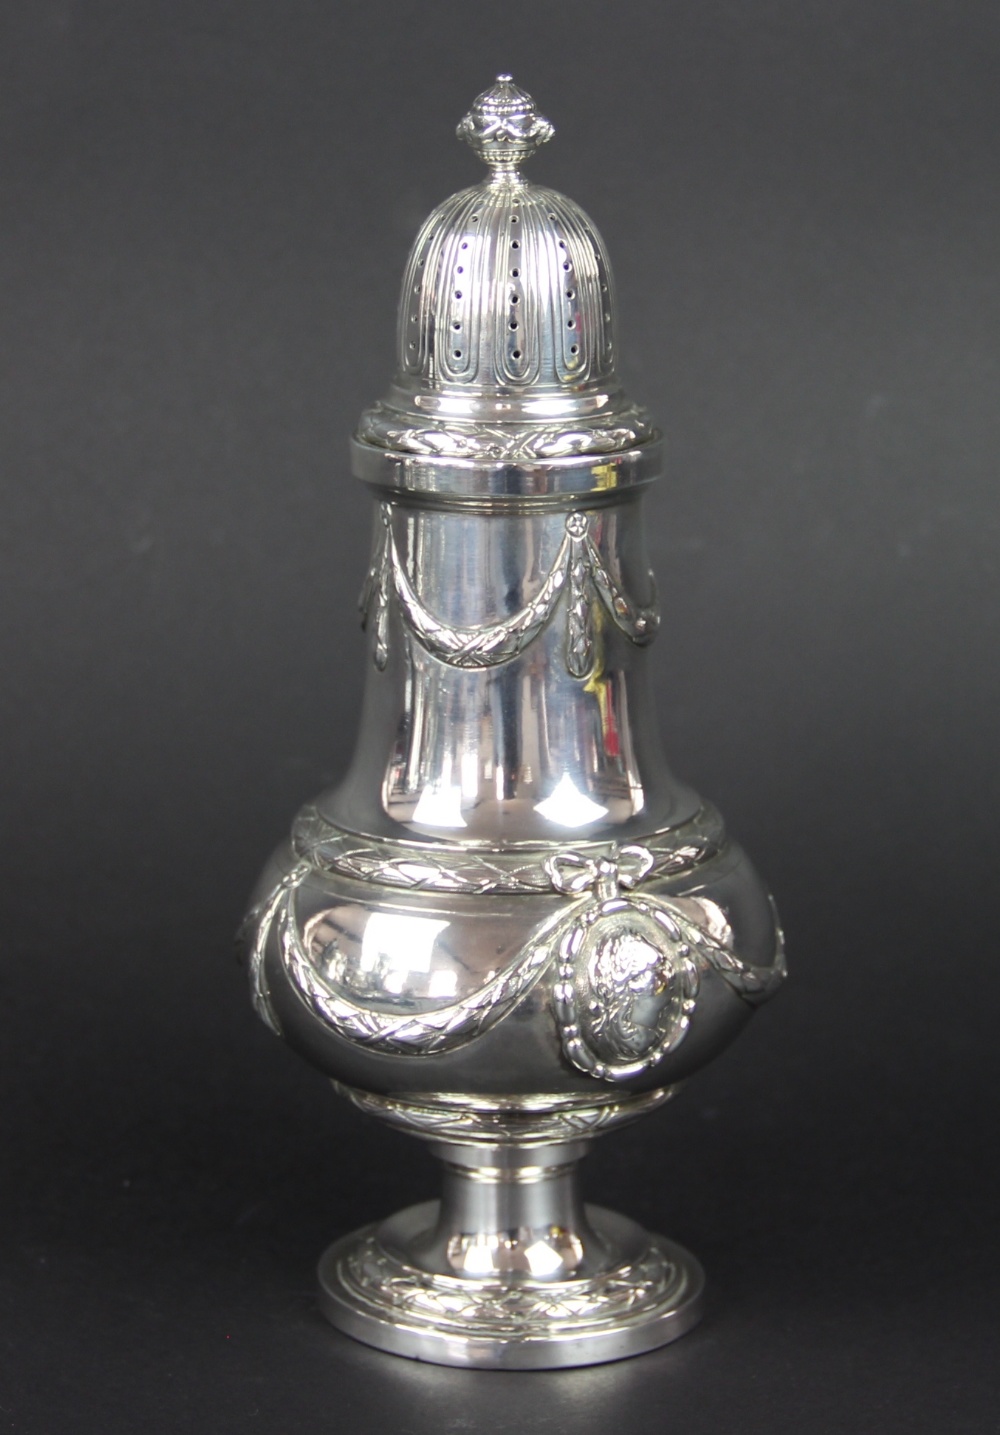 A large German silver caster, imported by Berthold Muller and assayed for Chester 1899,